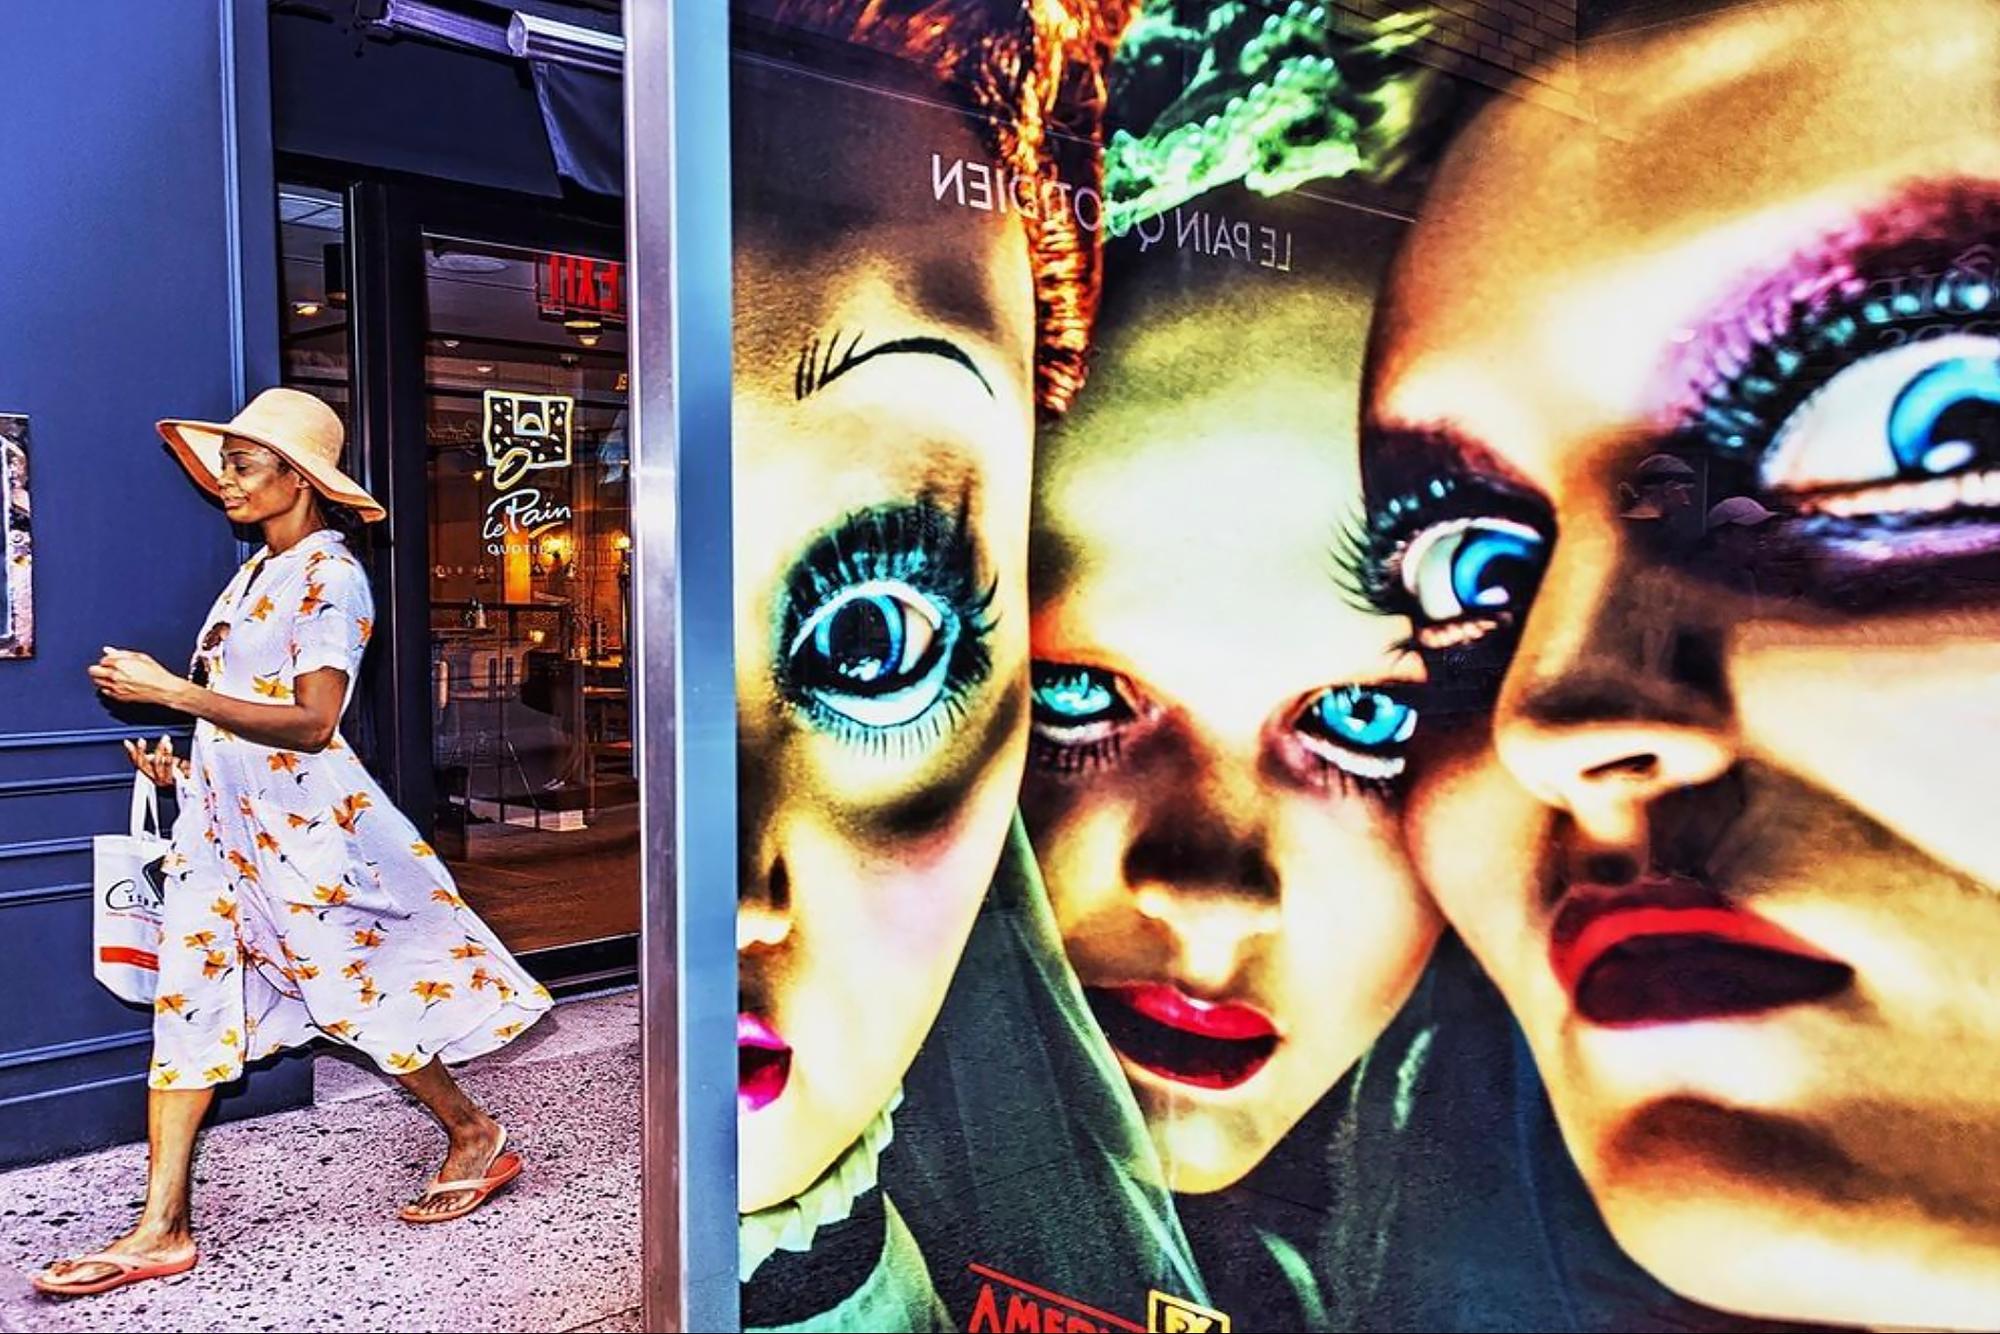 Mitchell Funk Figurative Photograph - Double-take.  Street Photography with Eerie Blue Eyed Billboard